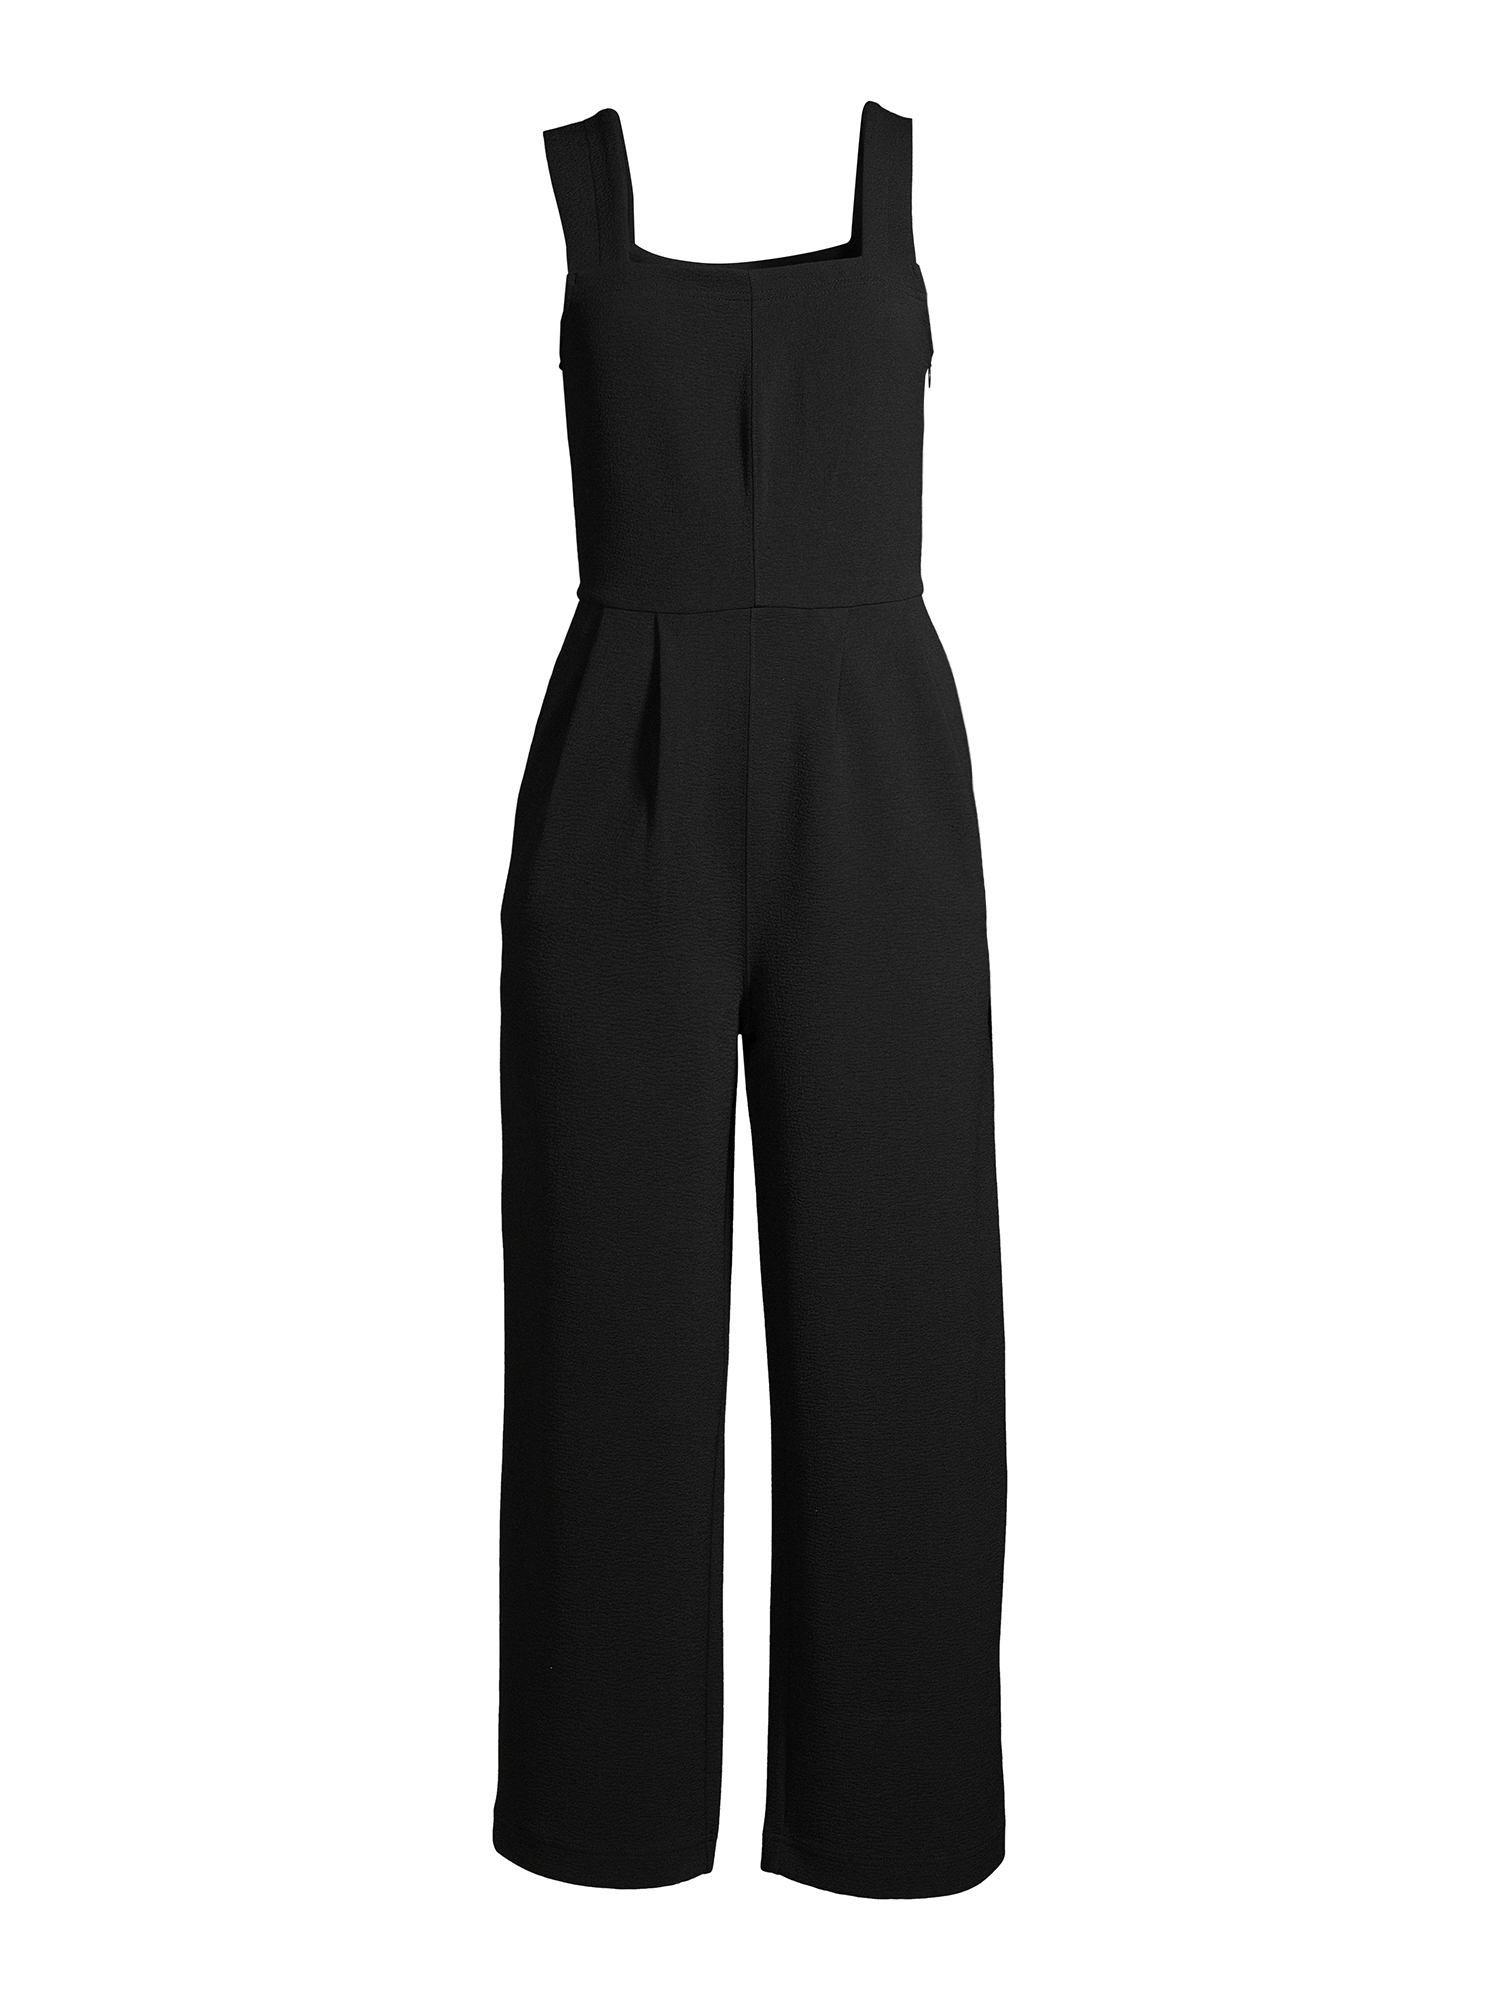 Free Assembly Women’s Wide Leg Playsuit - image 1 of 6